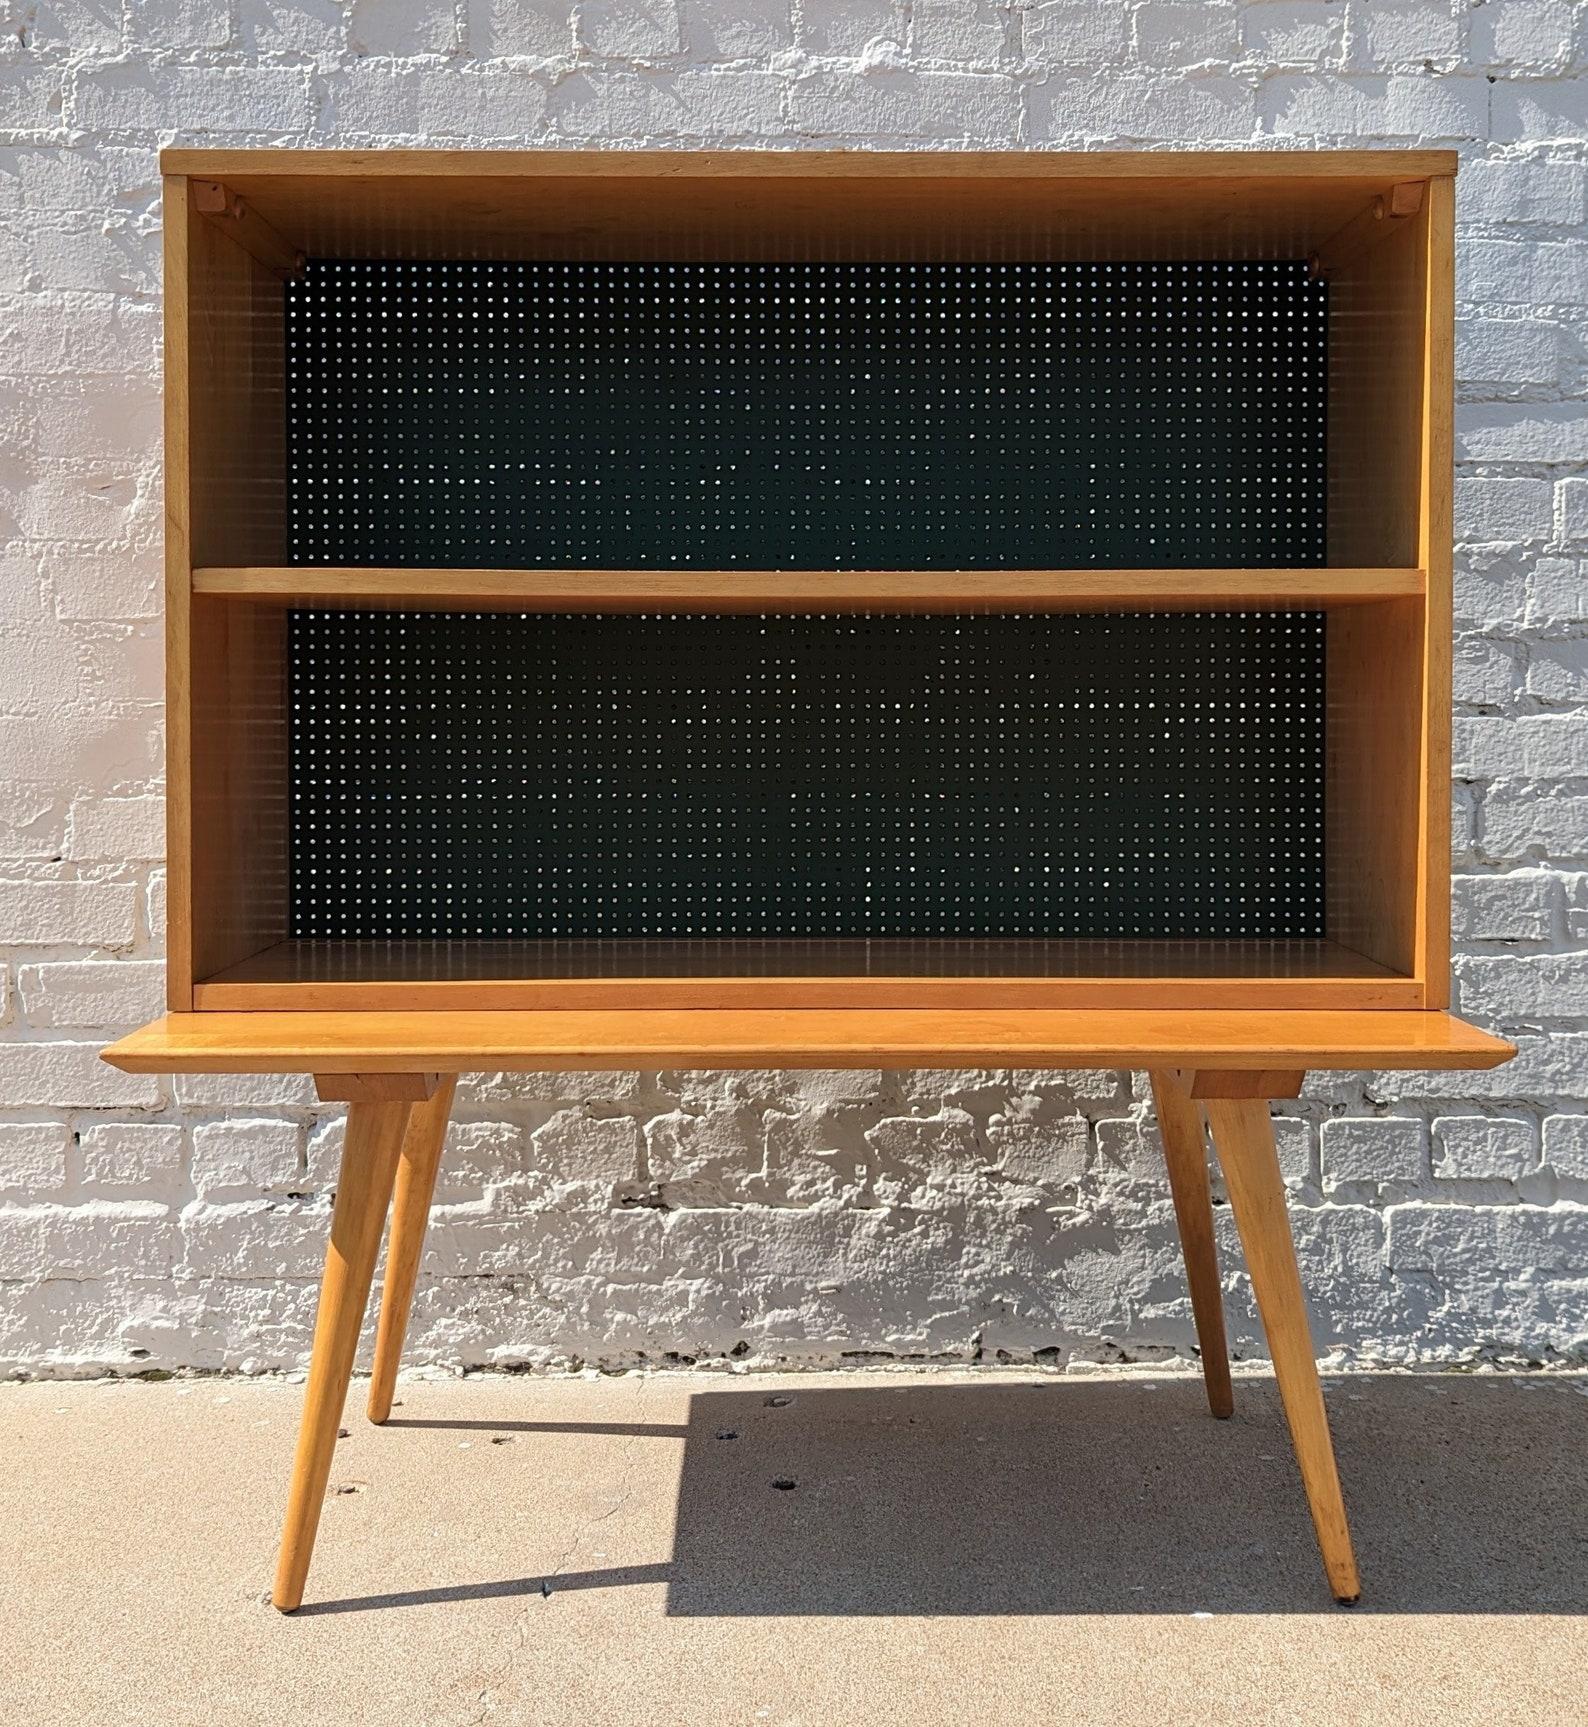 Mid Century Modern Paul McCobb Planner Group Modular Cabinet

Above average vintage condition and structurally sound. Has some expected slight finish wear and scratching. Has a couple small dings and discolorations on top. Table has some rings on